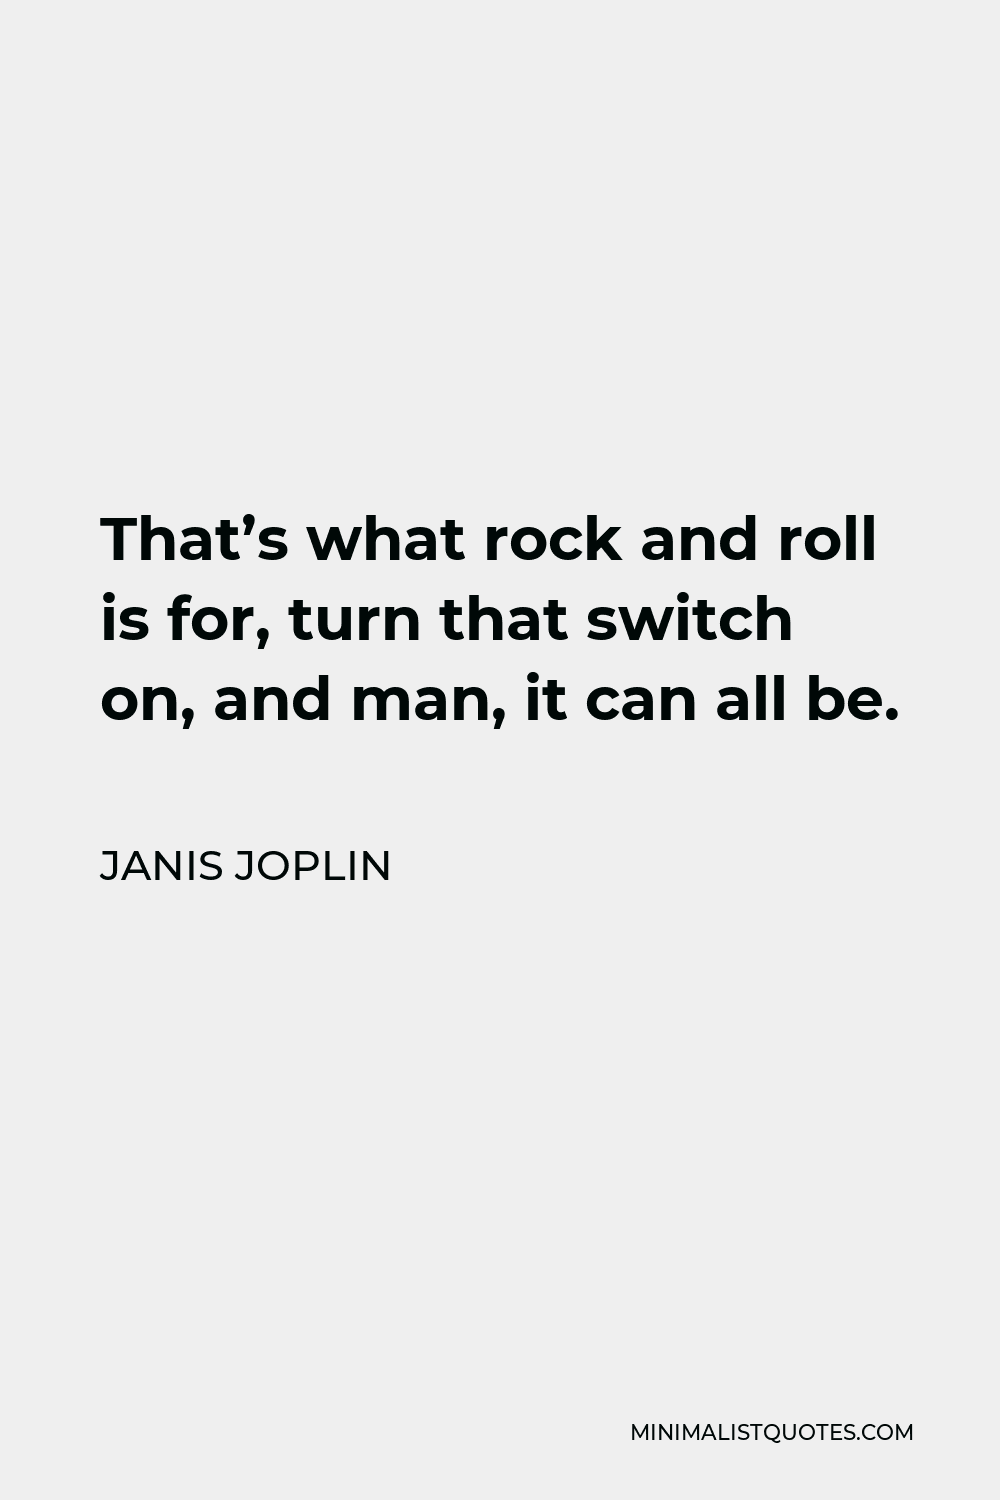 Janis Joplin Quote - That’s what rock and roll is for, turn that switch on, and man, it can all be.